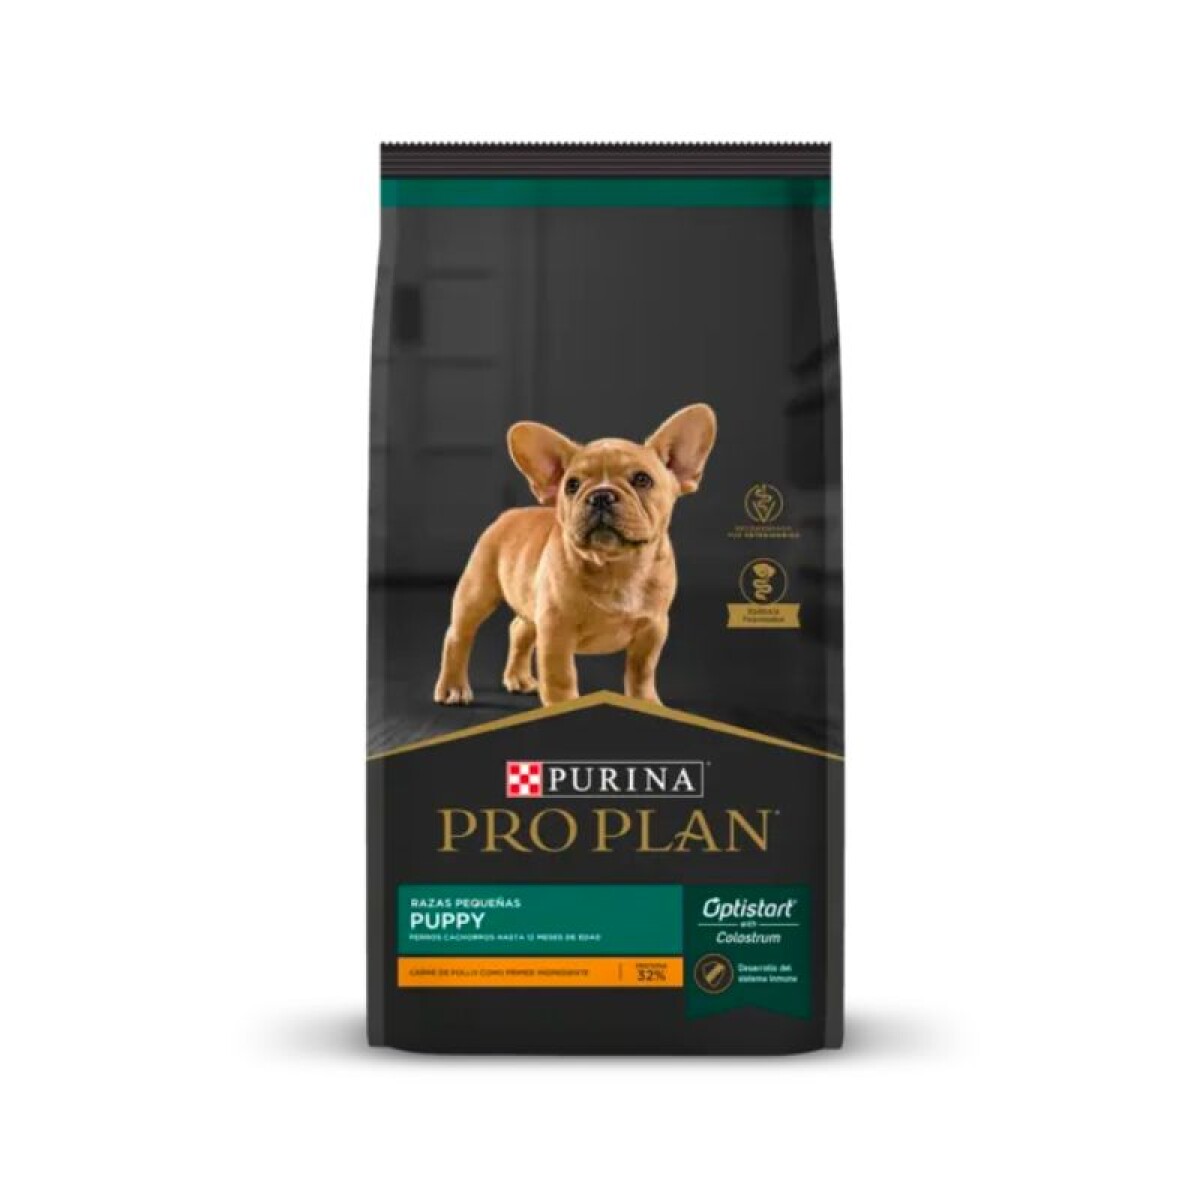 PROPLAN PUPPY SMALL BREEDS 1 KG - Proplan Puppy Small Breeds 1 Kg 